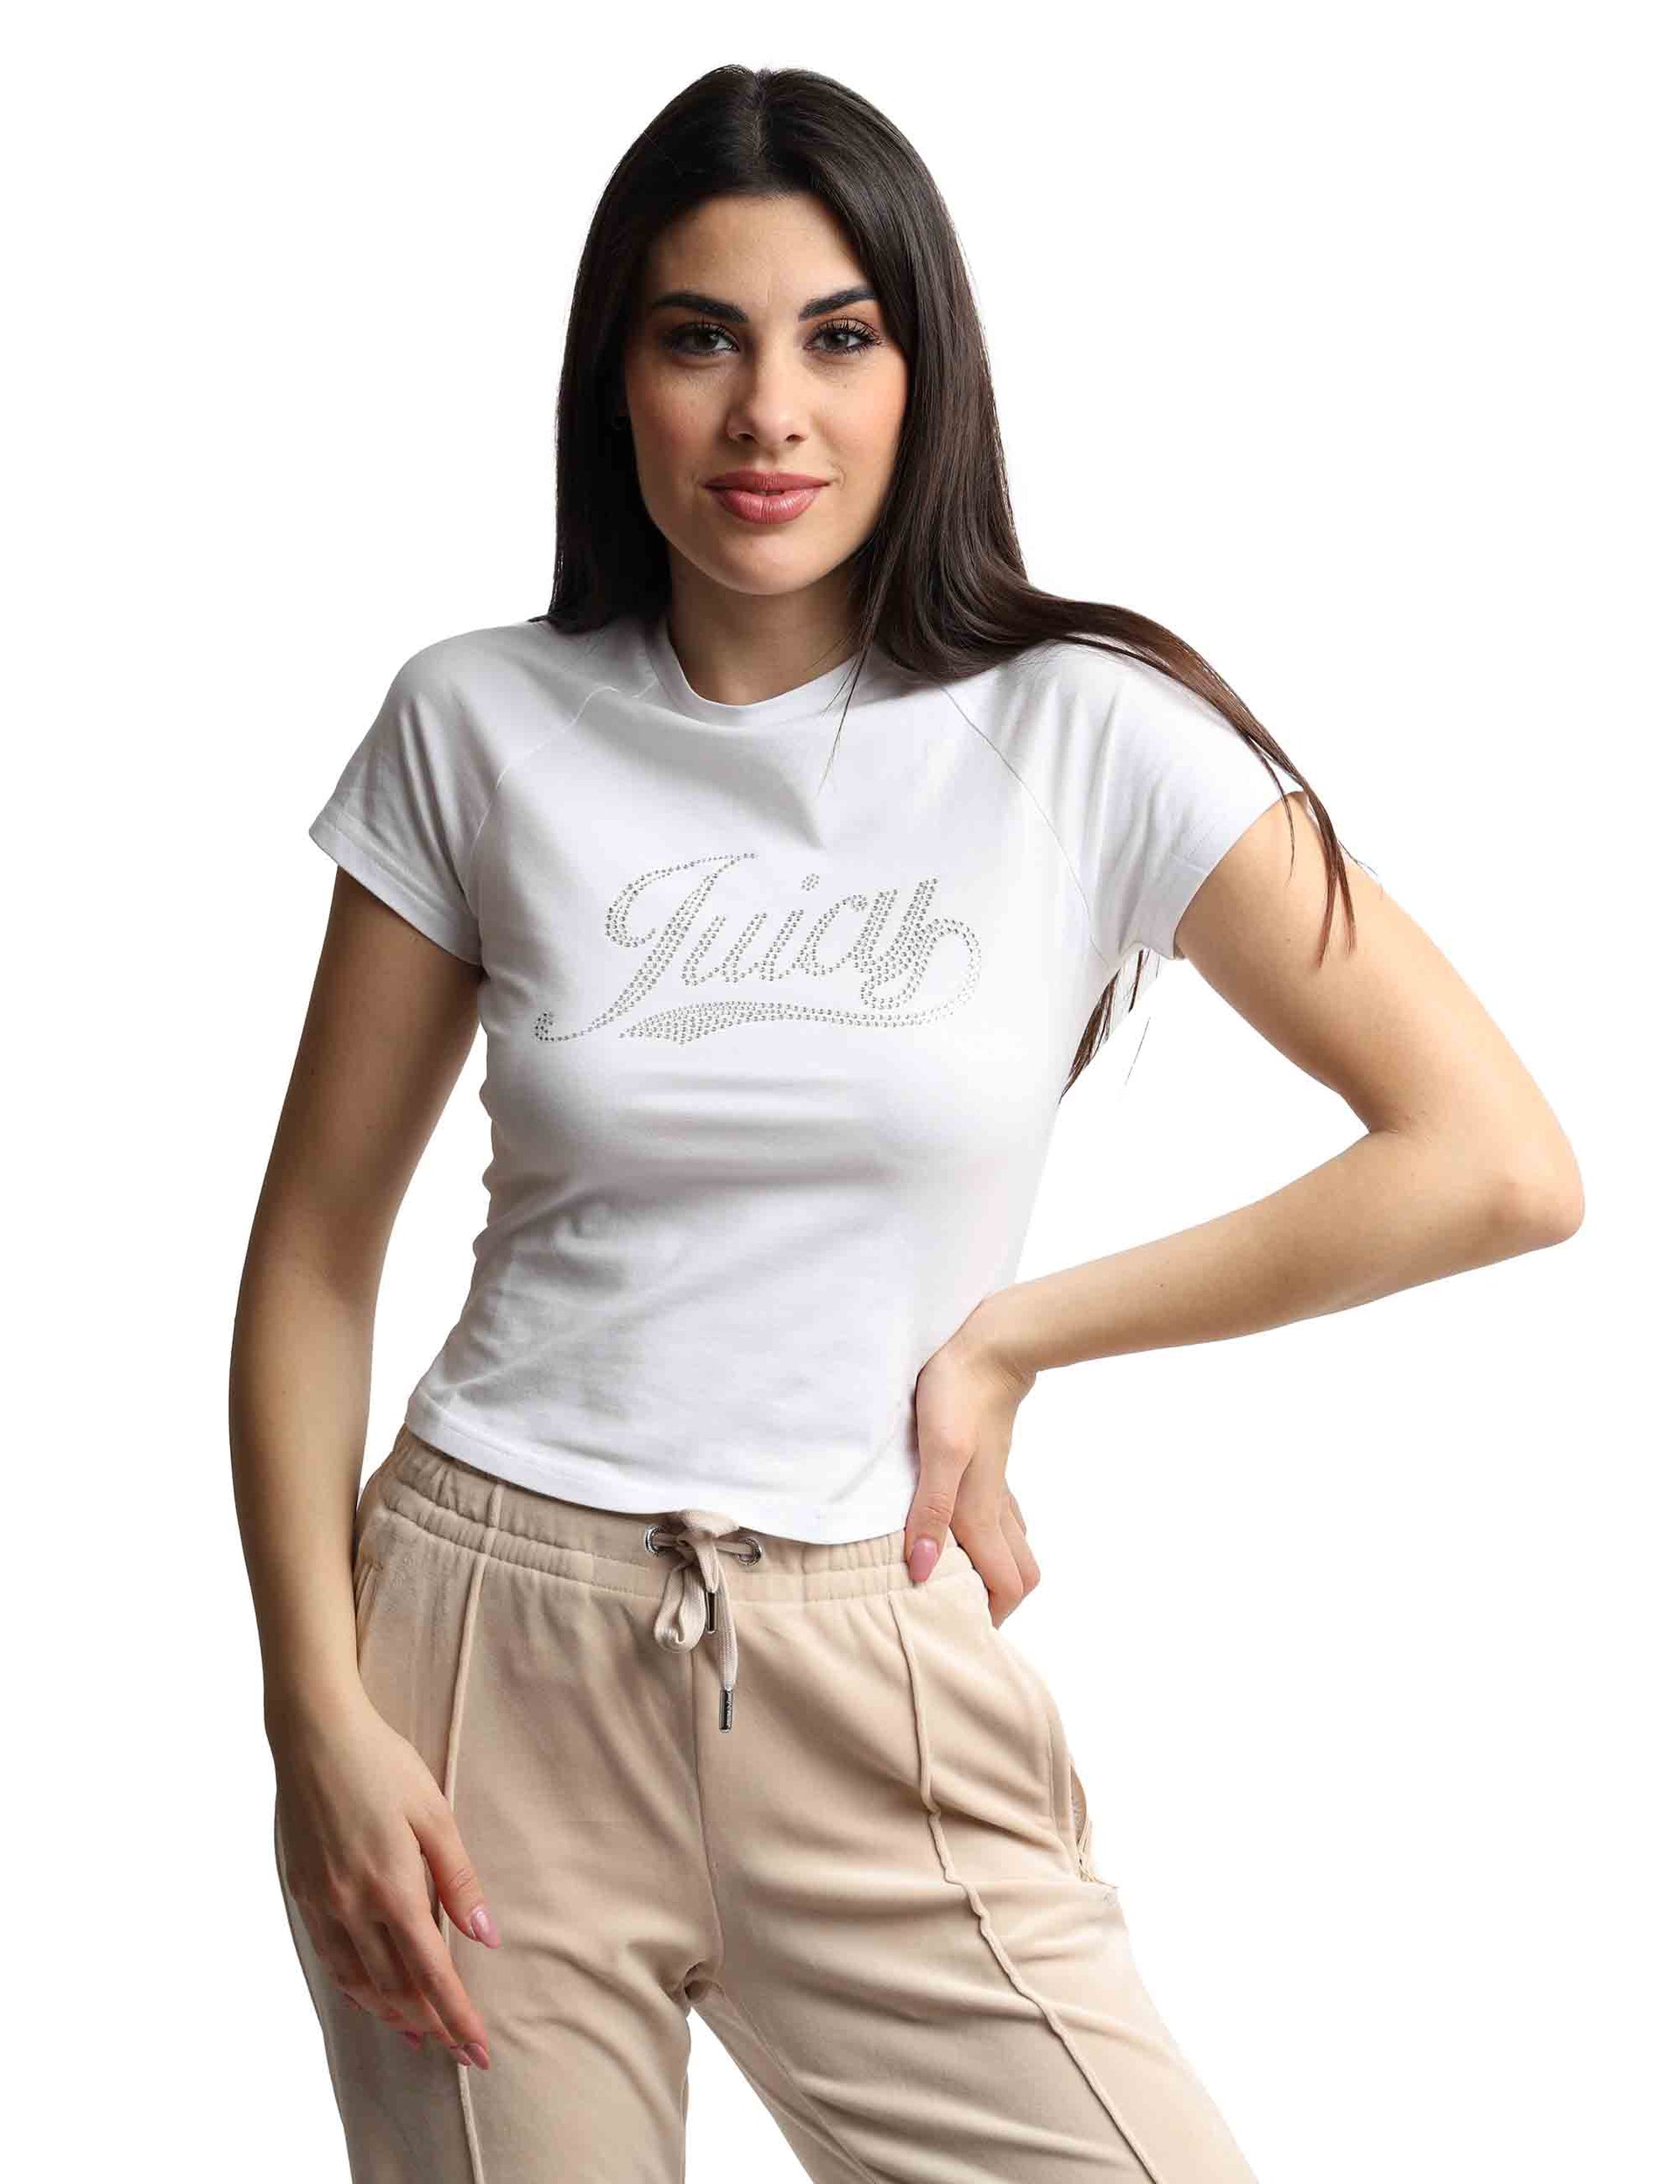 Ryder Rodeo women's t-shirts in white cotton with crew neck and rhinestones